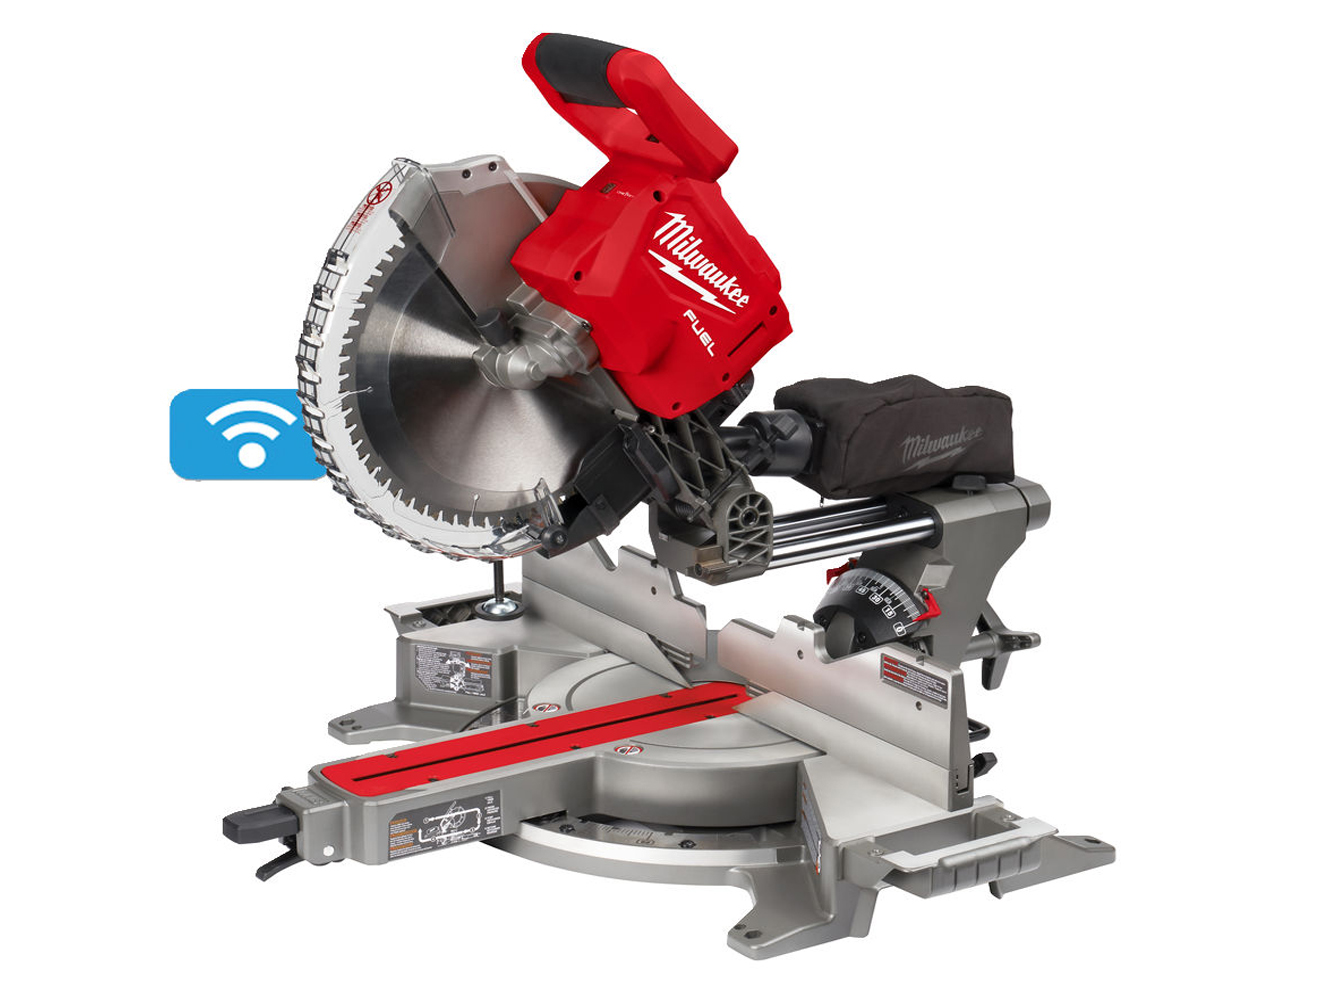 Milwaukee M18FMS305 One-Key 18V 305mm Double Bevel Mitre Saw - Body Only